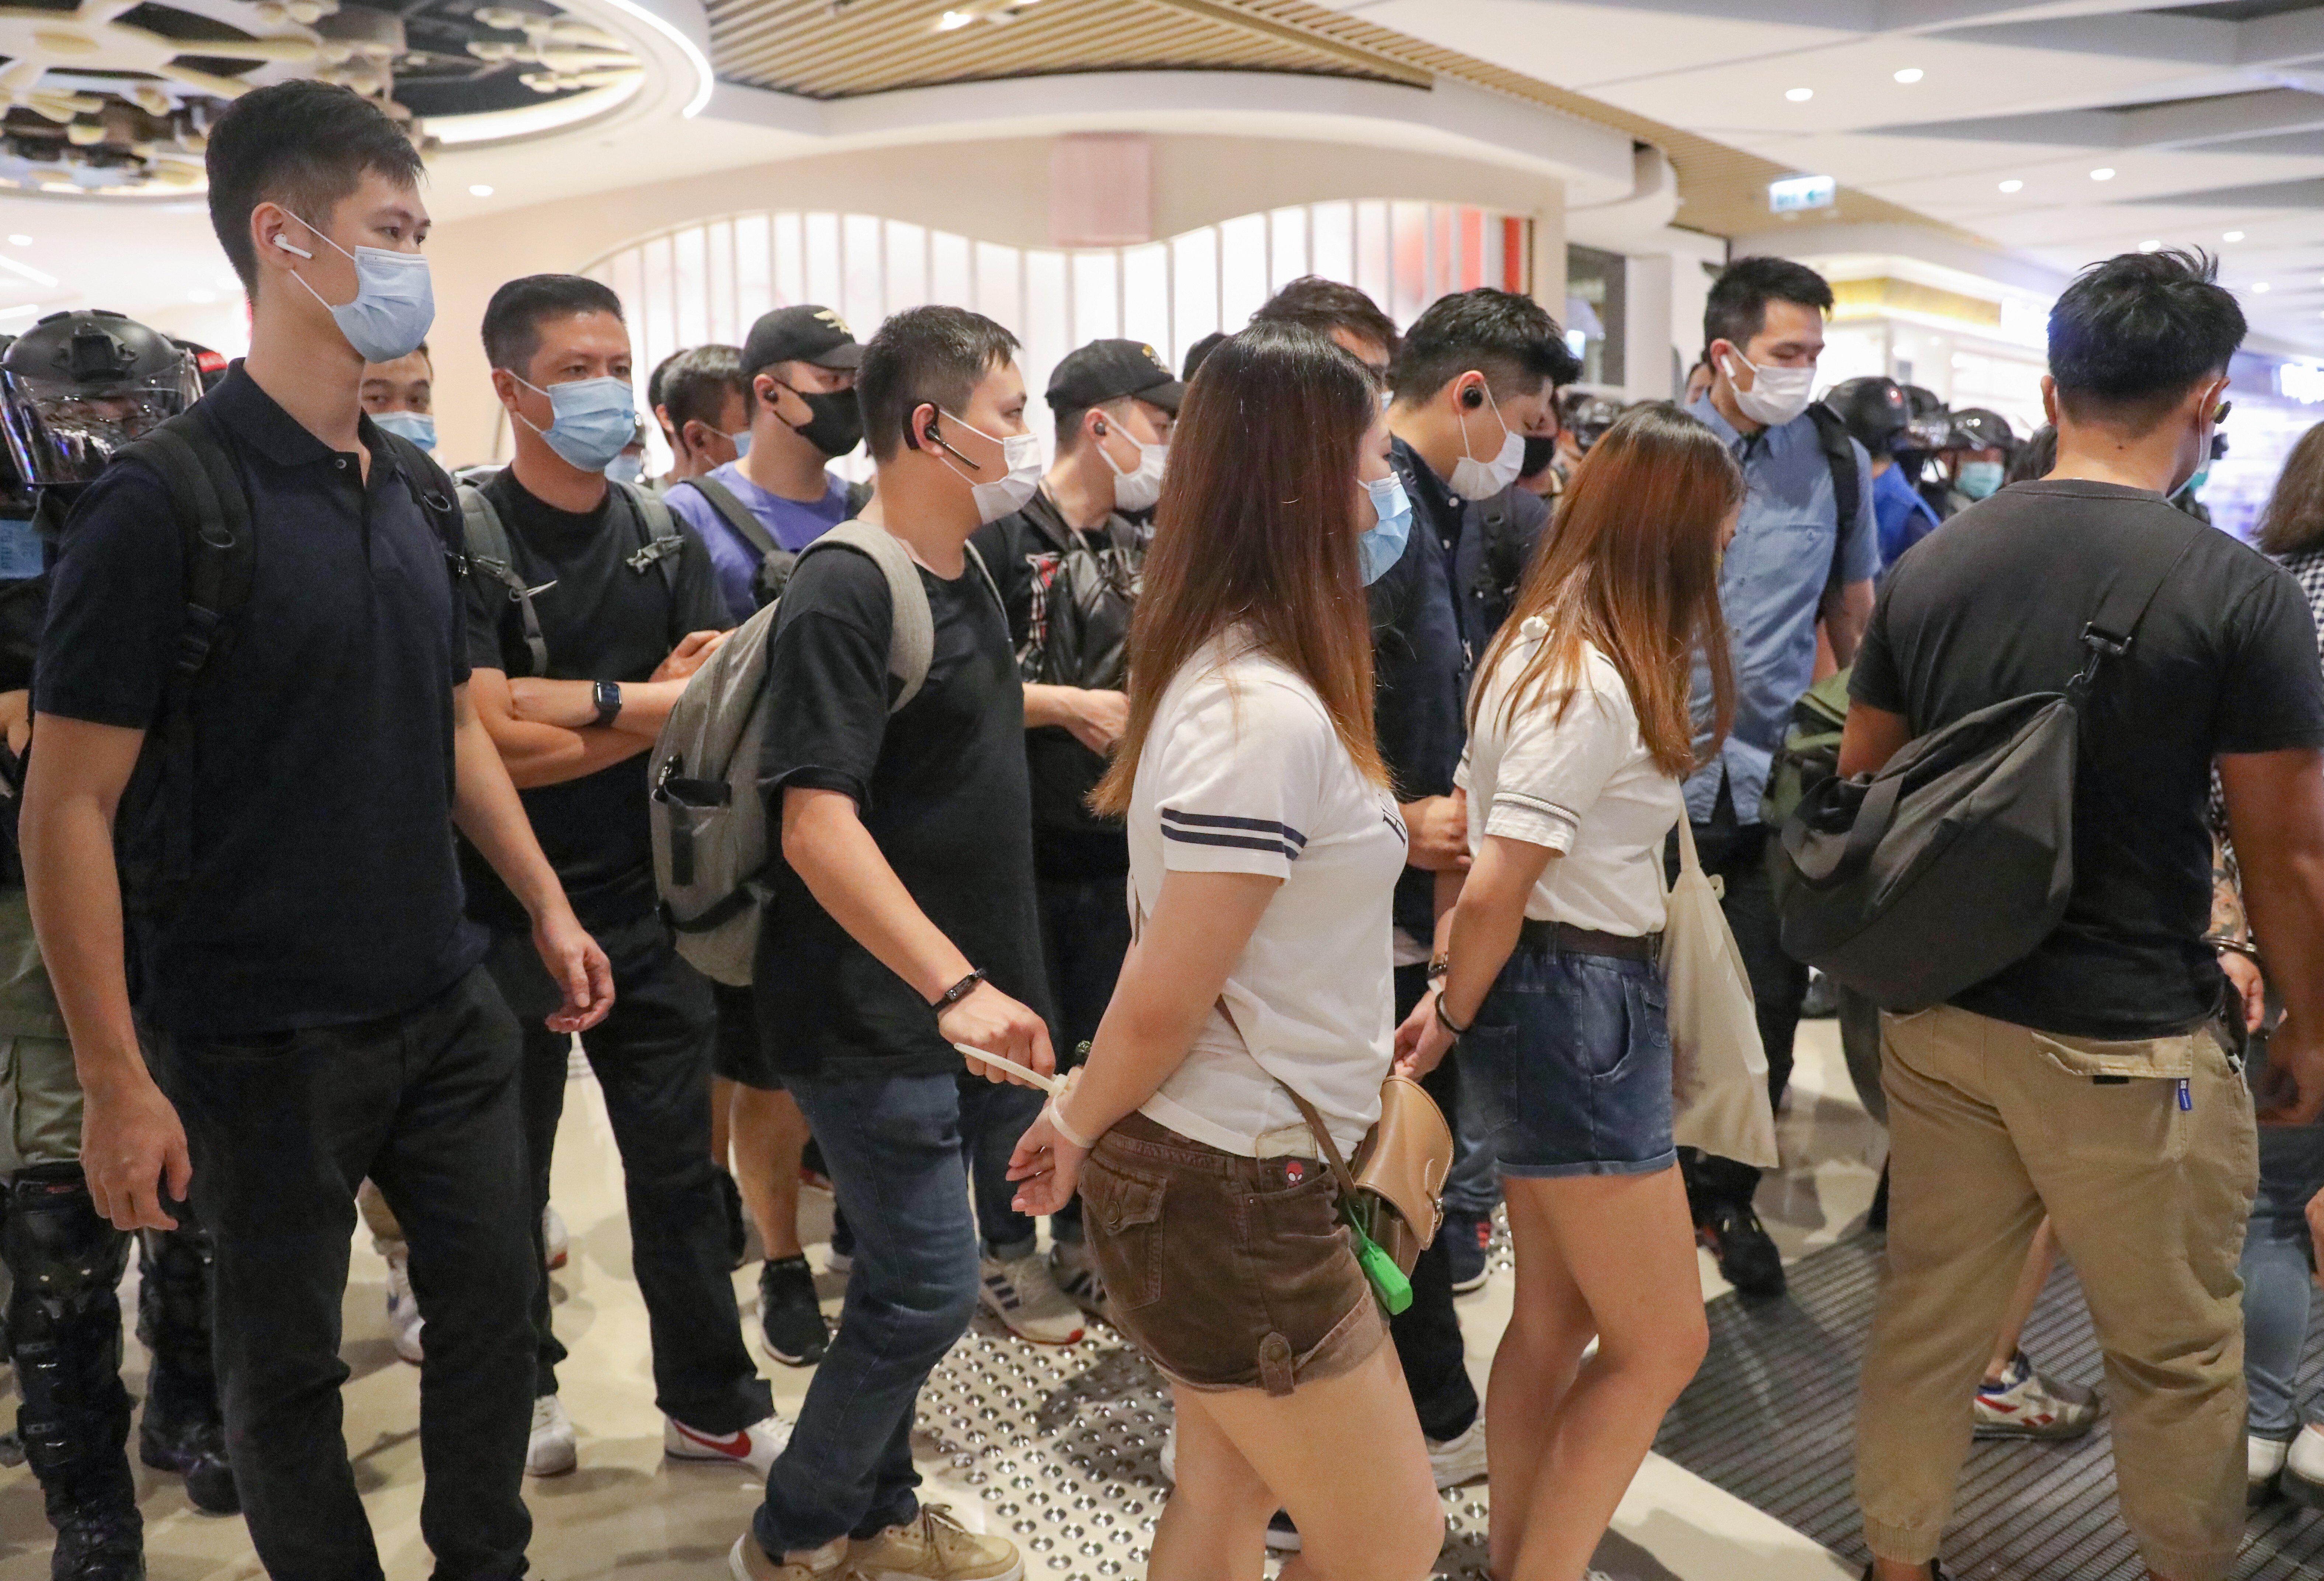 At least 14 people were arrested at Yoho mall. Photo: SCMP / Dickson Lee